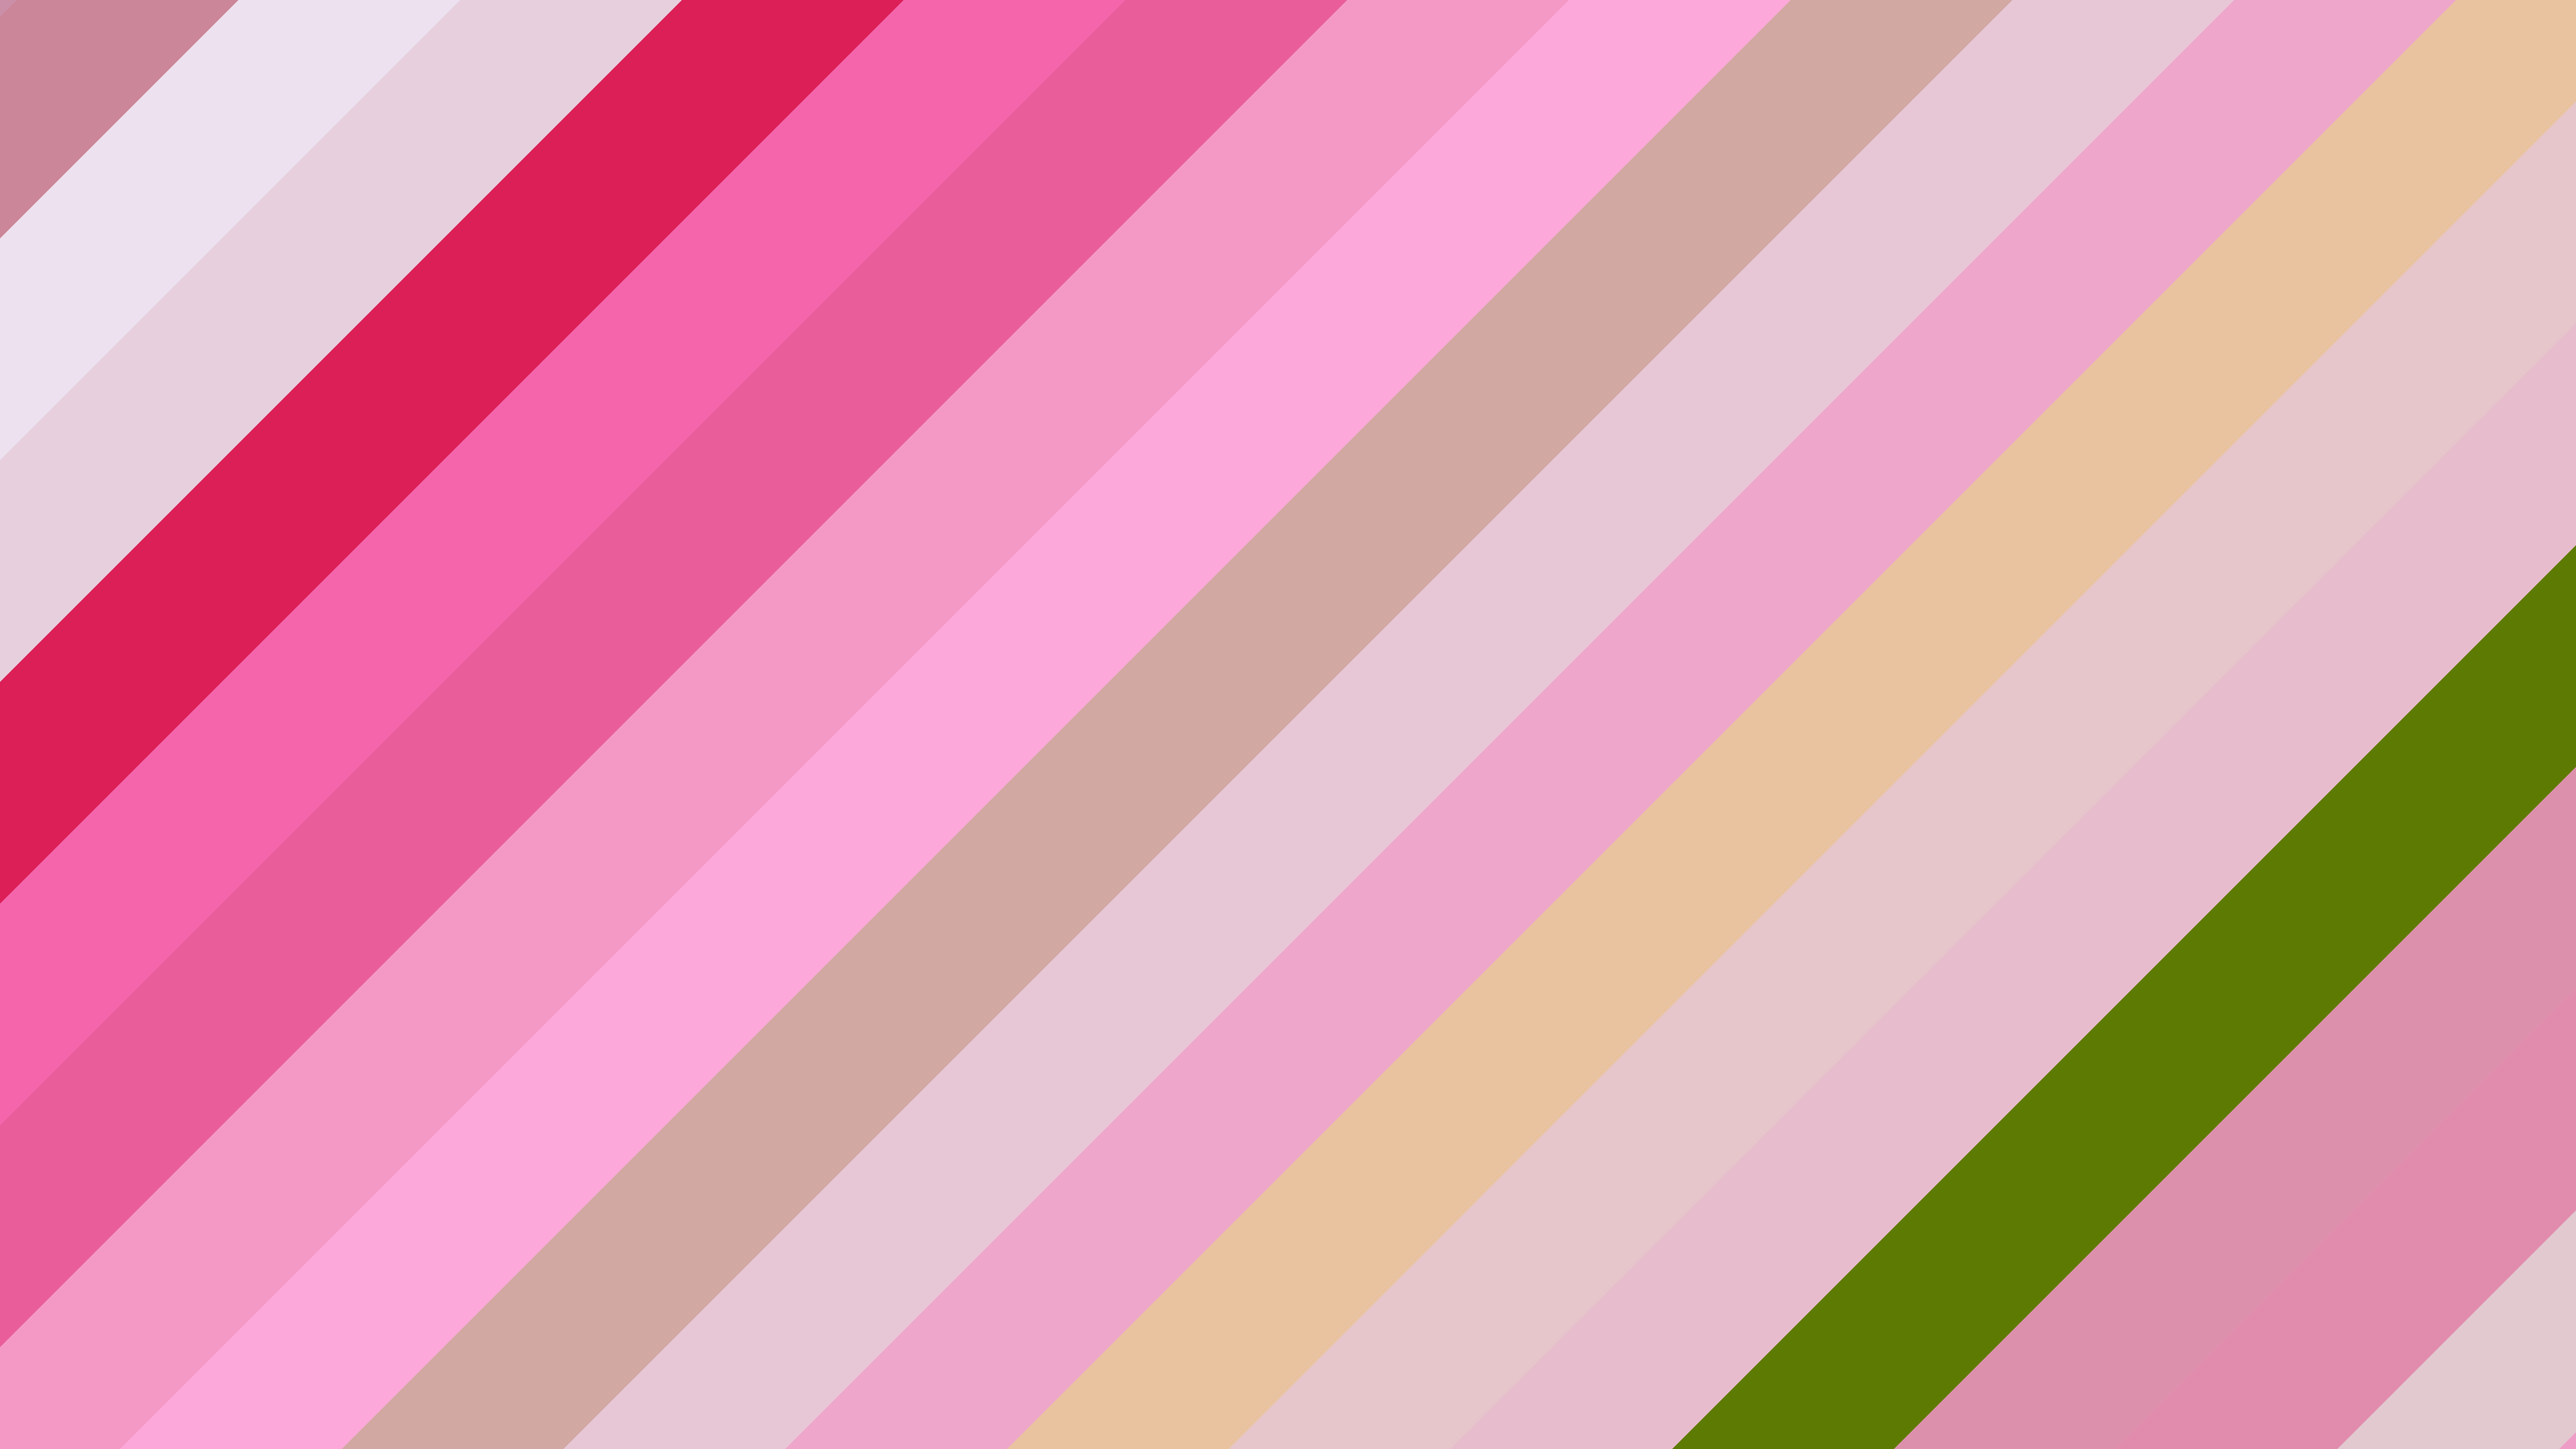 Free Pink and Green Diagonal Stripes Background